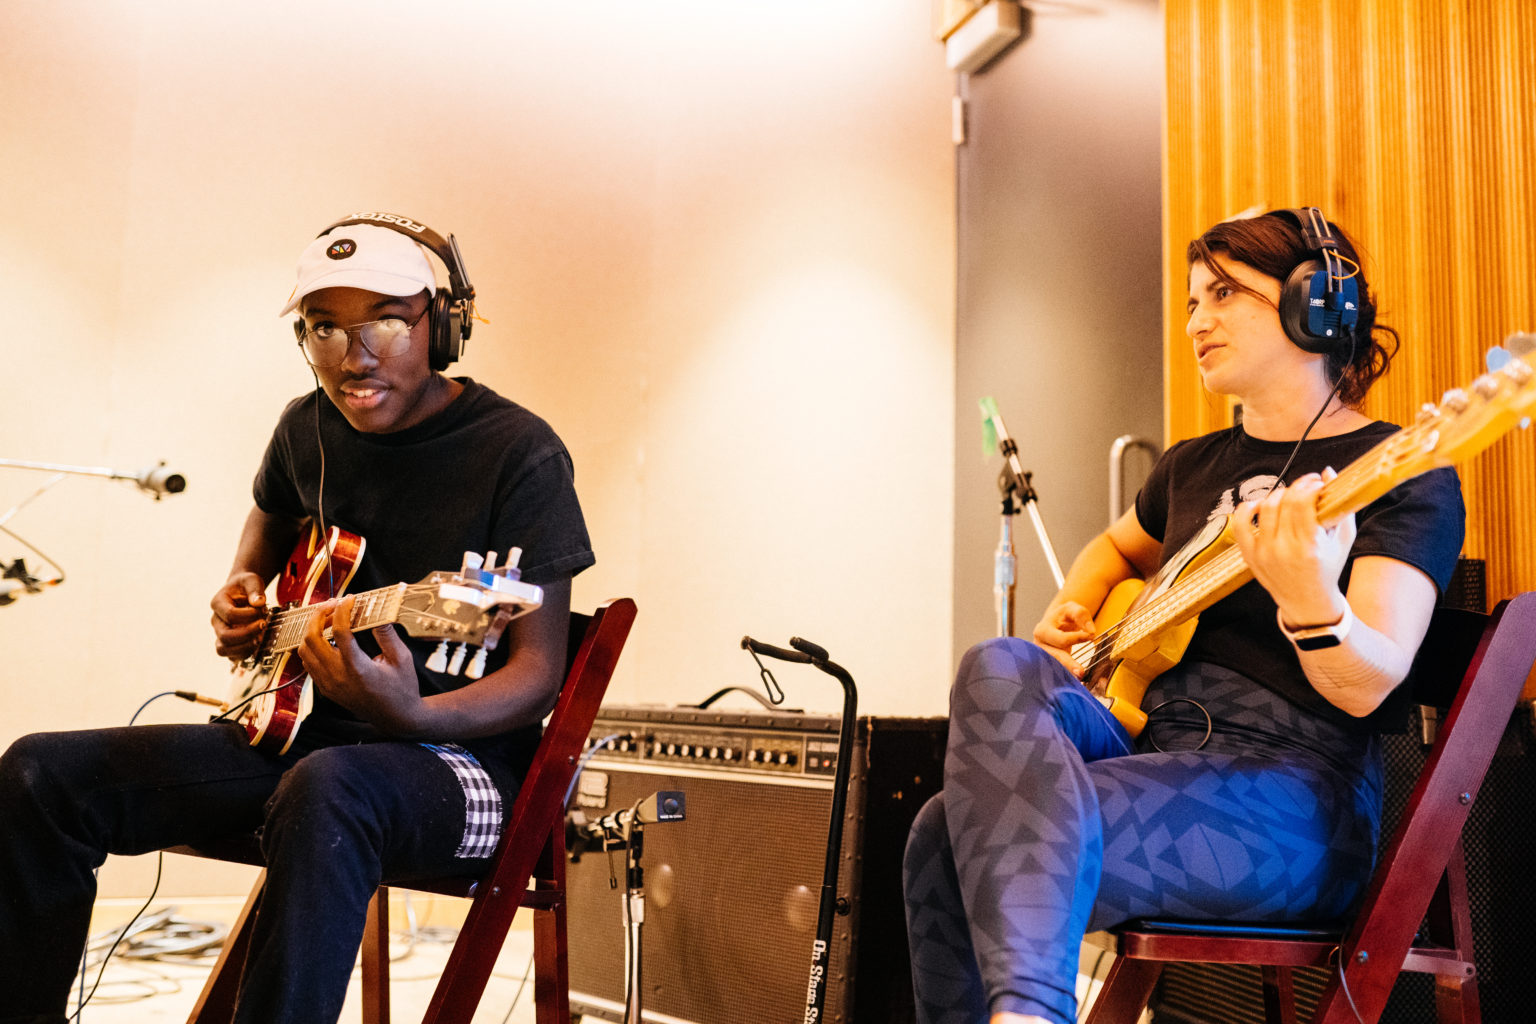 Students sitting and playing guitars in the studio